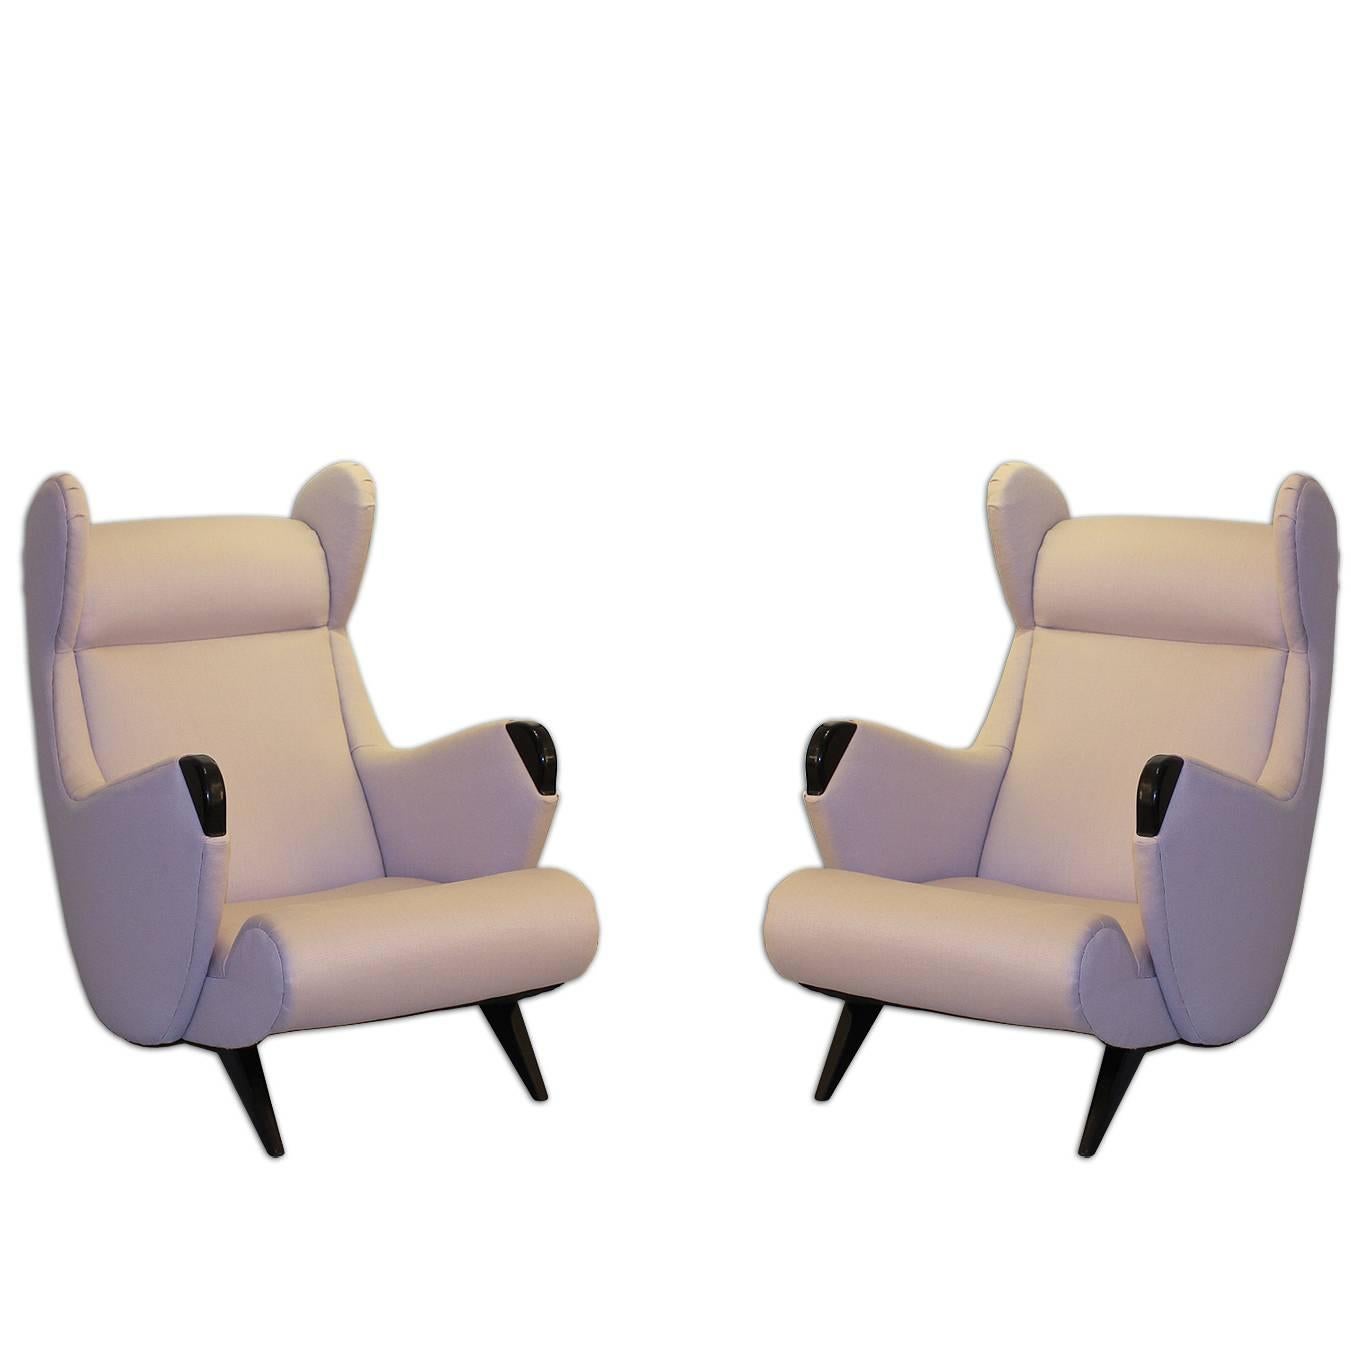 Pair of Chairs, Model of Erton